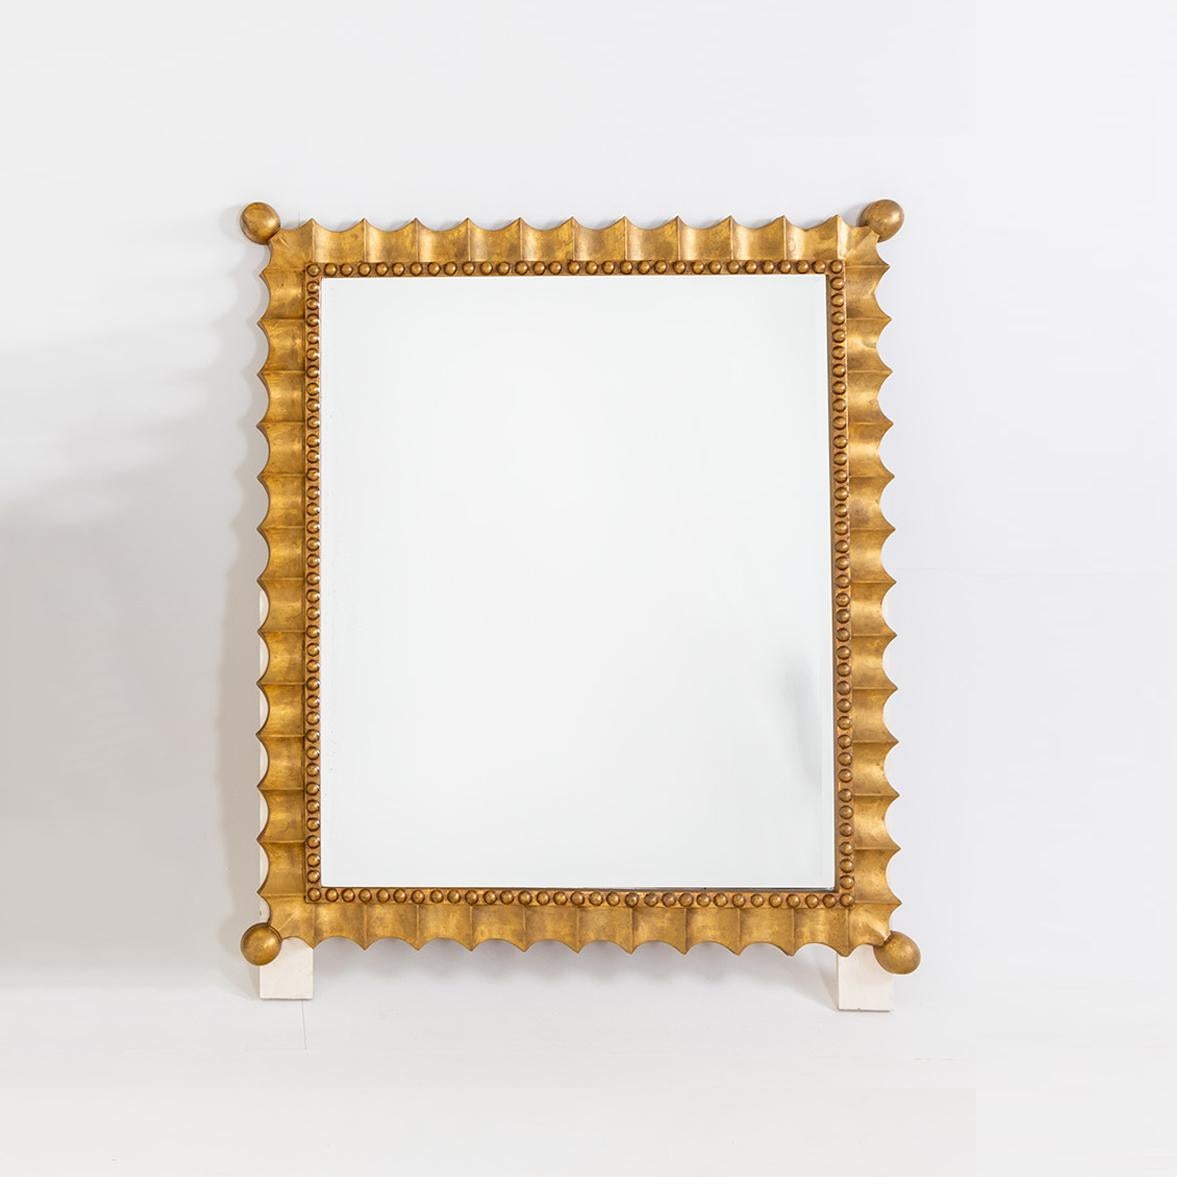 Gold-patinated Scalloped Wall Mirror, Mid-20th Century In Good Condition For Sale In Greding, DE